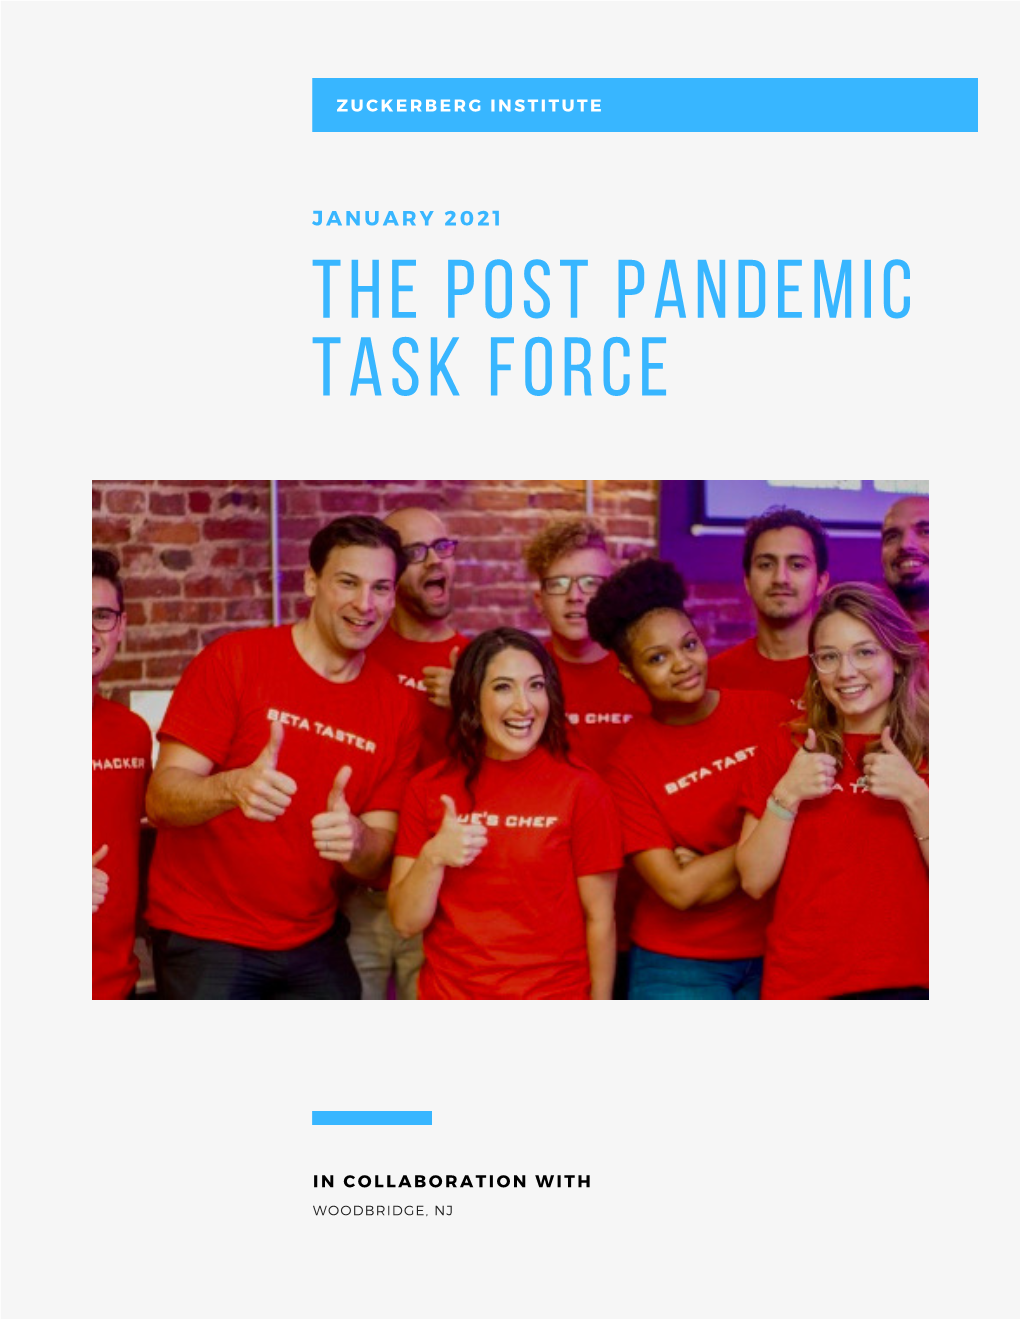 The Post Pandemic Task Force